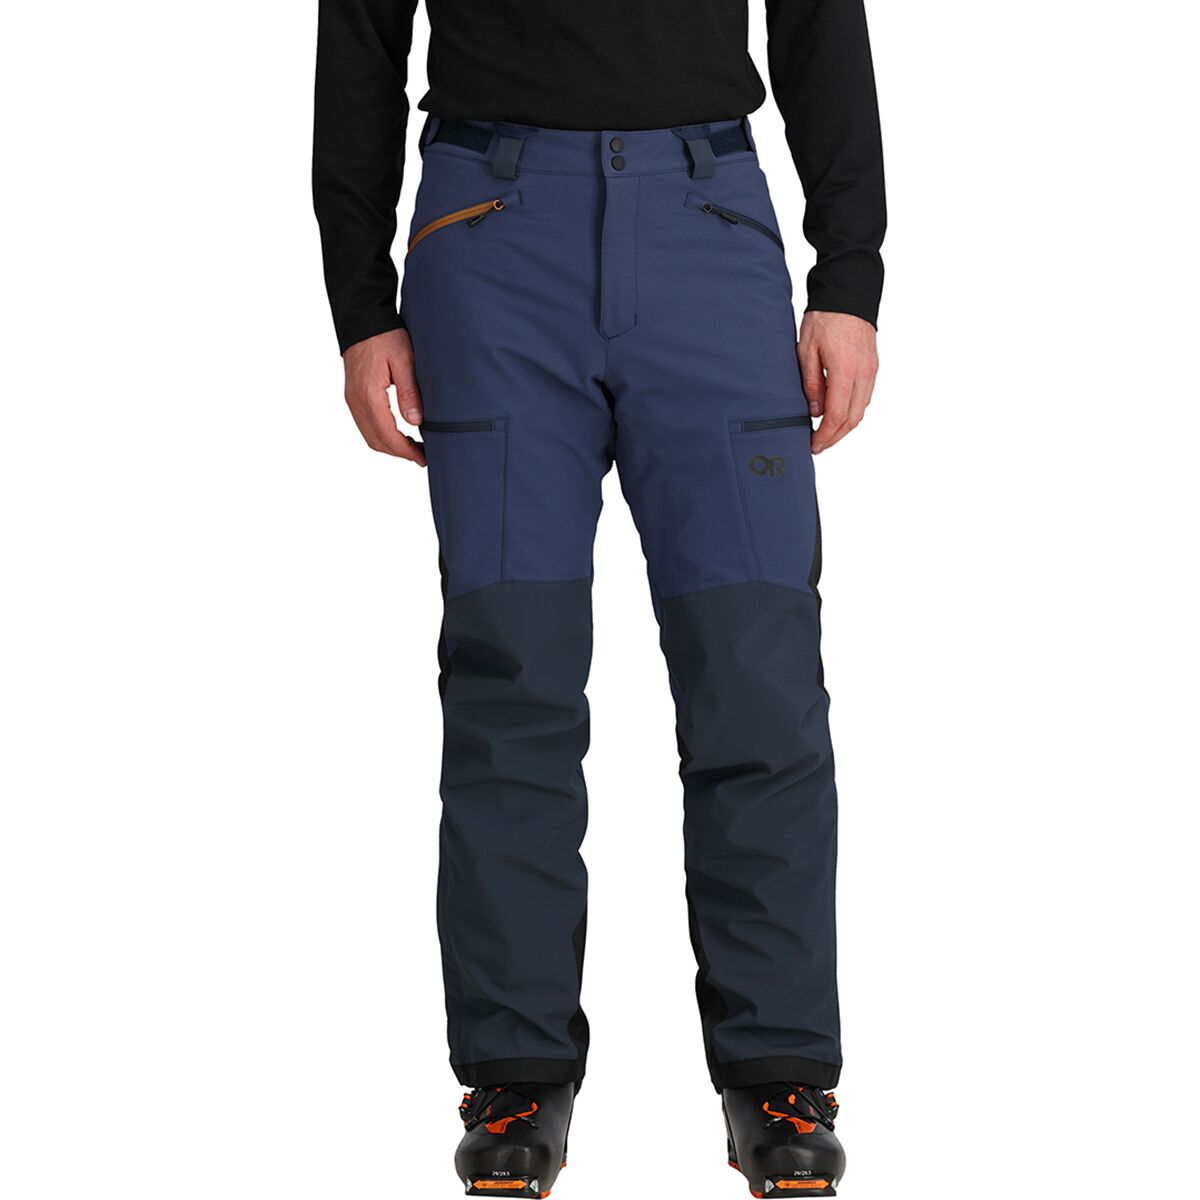 Outdoor Research Trailbreaker Tour Pant - Men's - Clothing